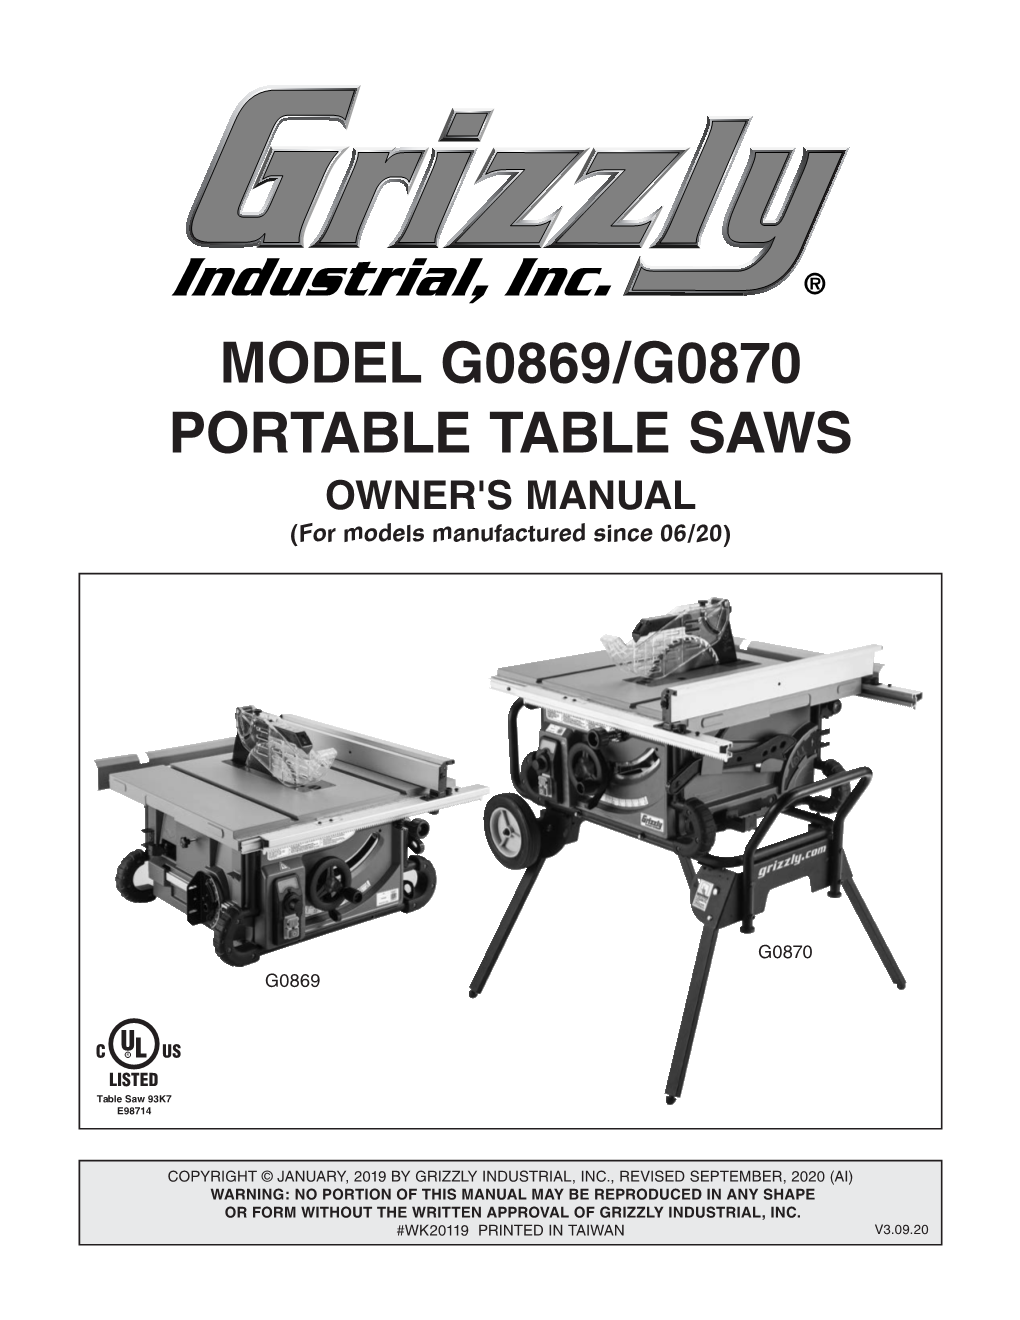 MODEL G0869/G0870 PORTABLE TABLE SAWS OWNER's MANUAL (For Models Manufactured Since 06/20)